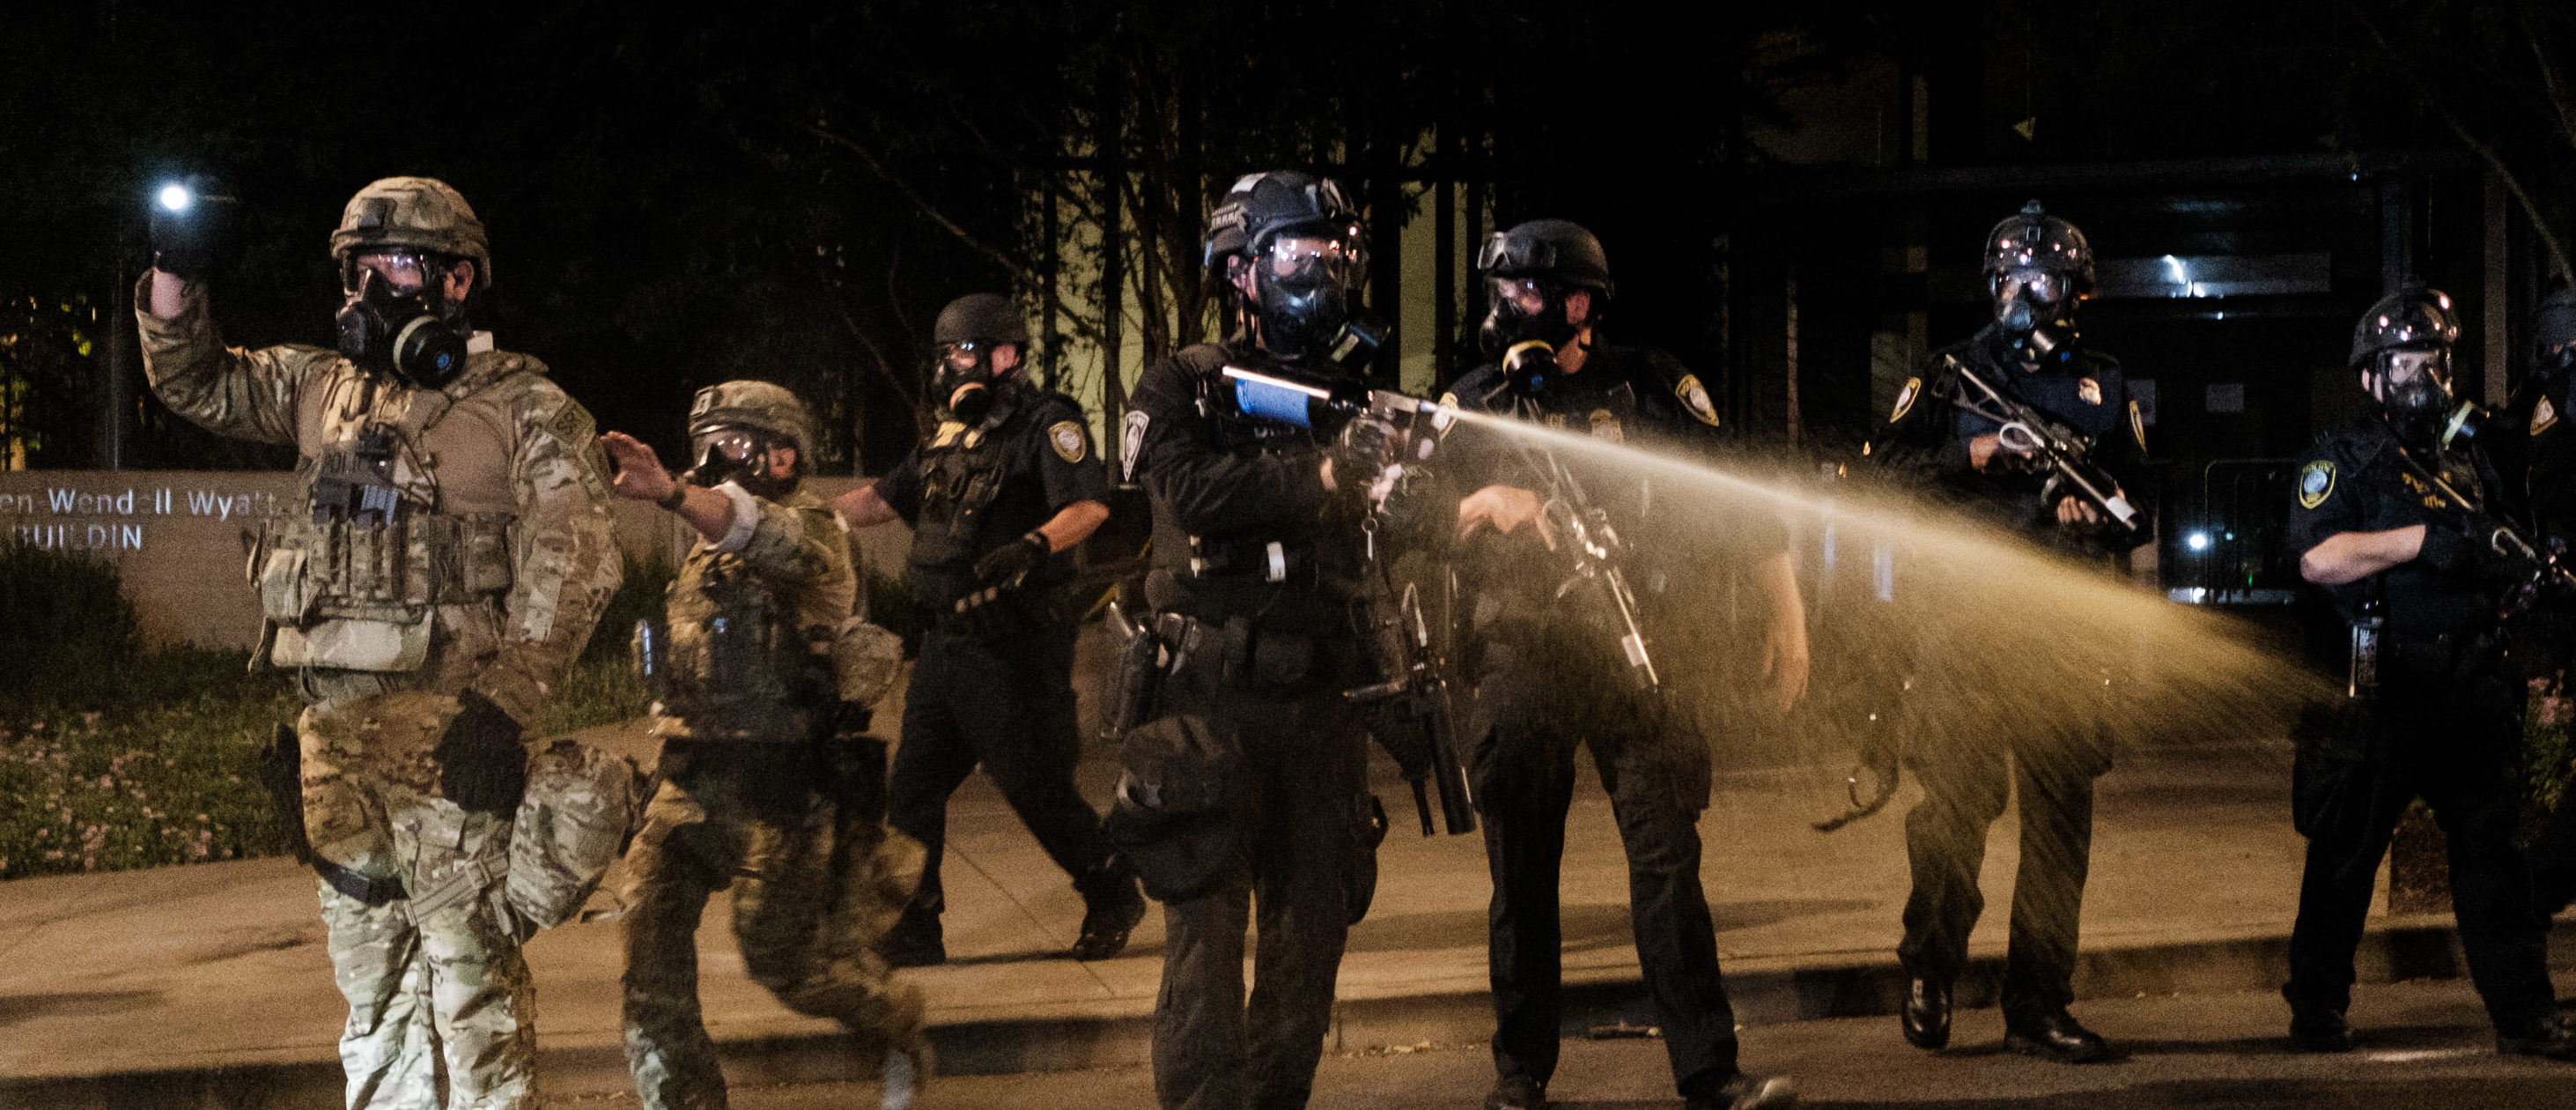 Federal officers use tear gas and other crowd dispersal munitions on protesters outside the Multnomah County Justice Center on July 17, 2020 in Portland, Oregon. (Mason Trinca/Getty Images)